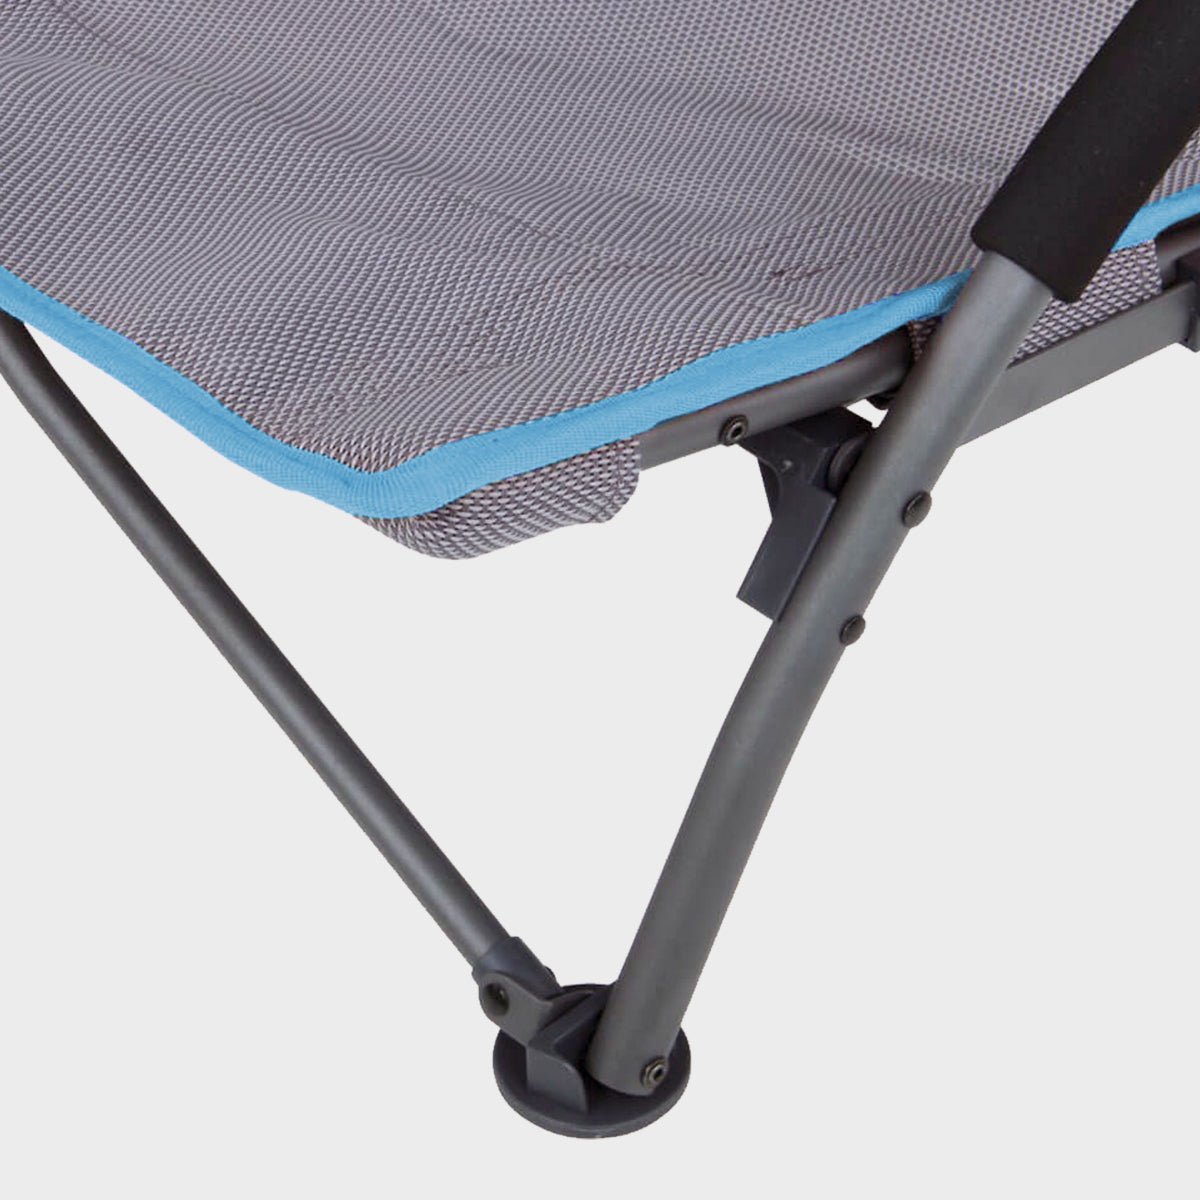 Amy Camping Chair - Portal Outdoor UK